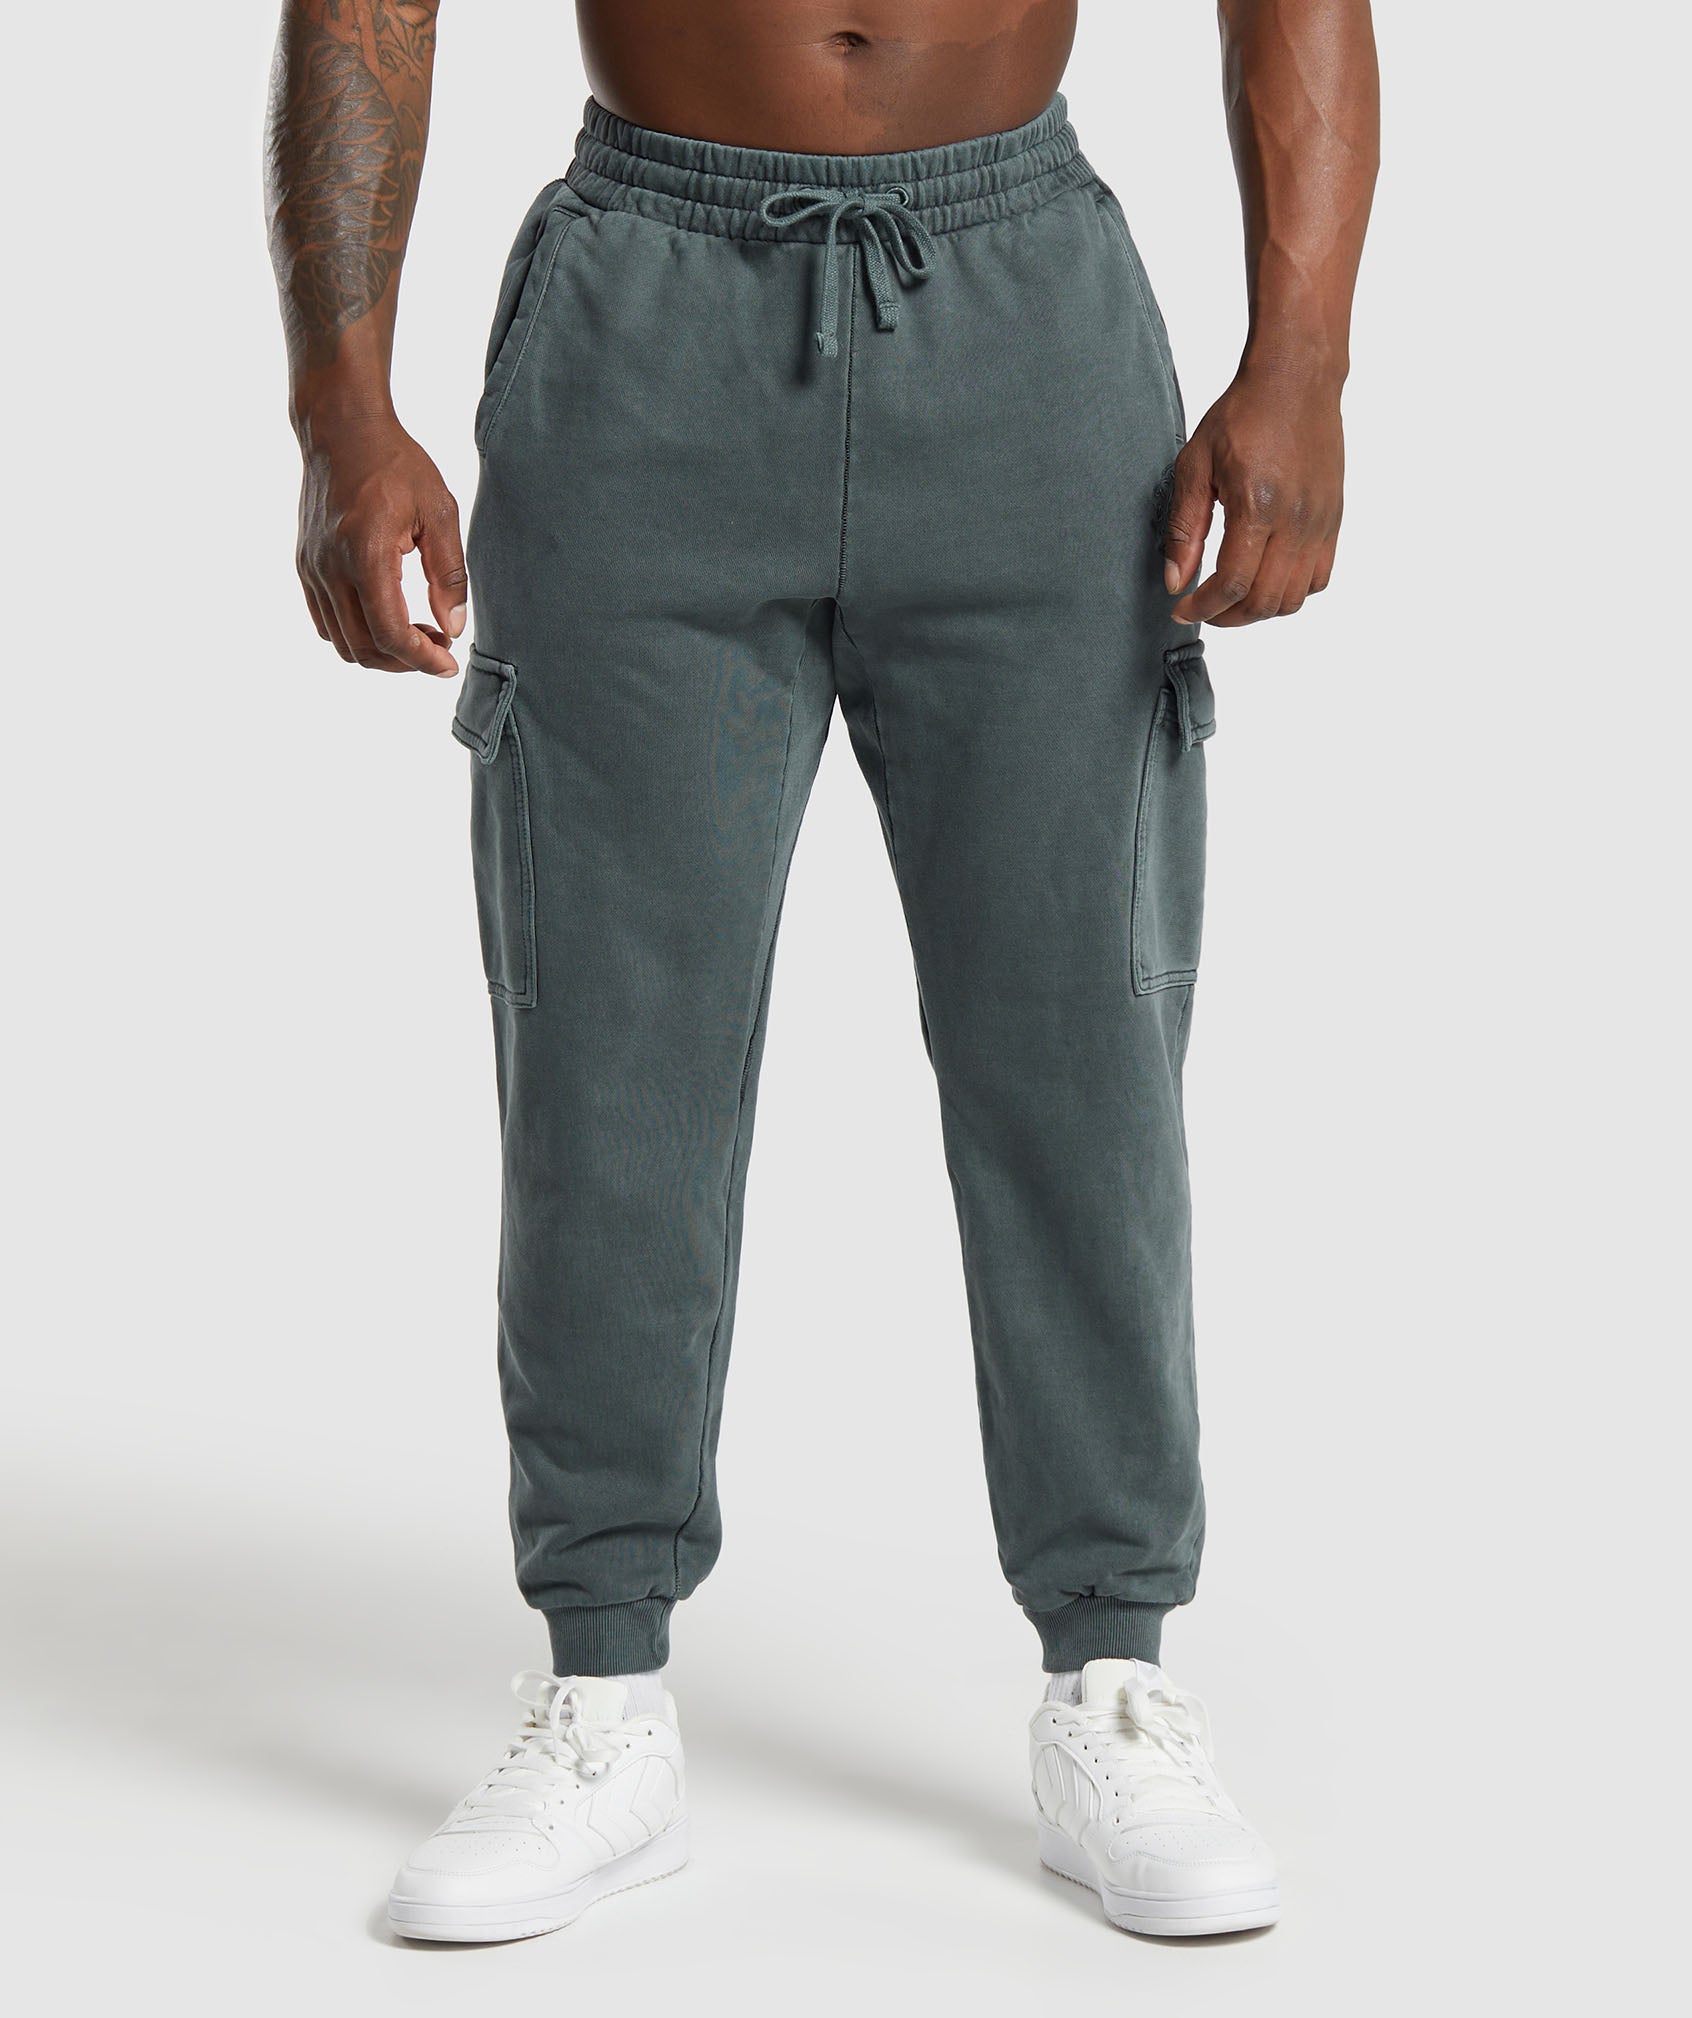 Premium Legacy Cargo Pants in Cargo Teal - view 1